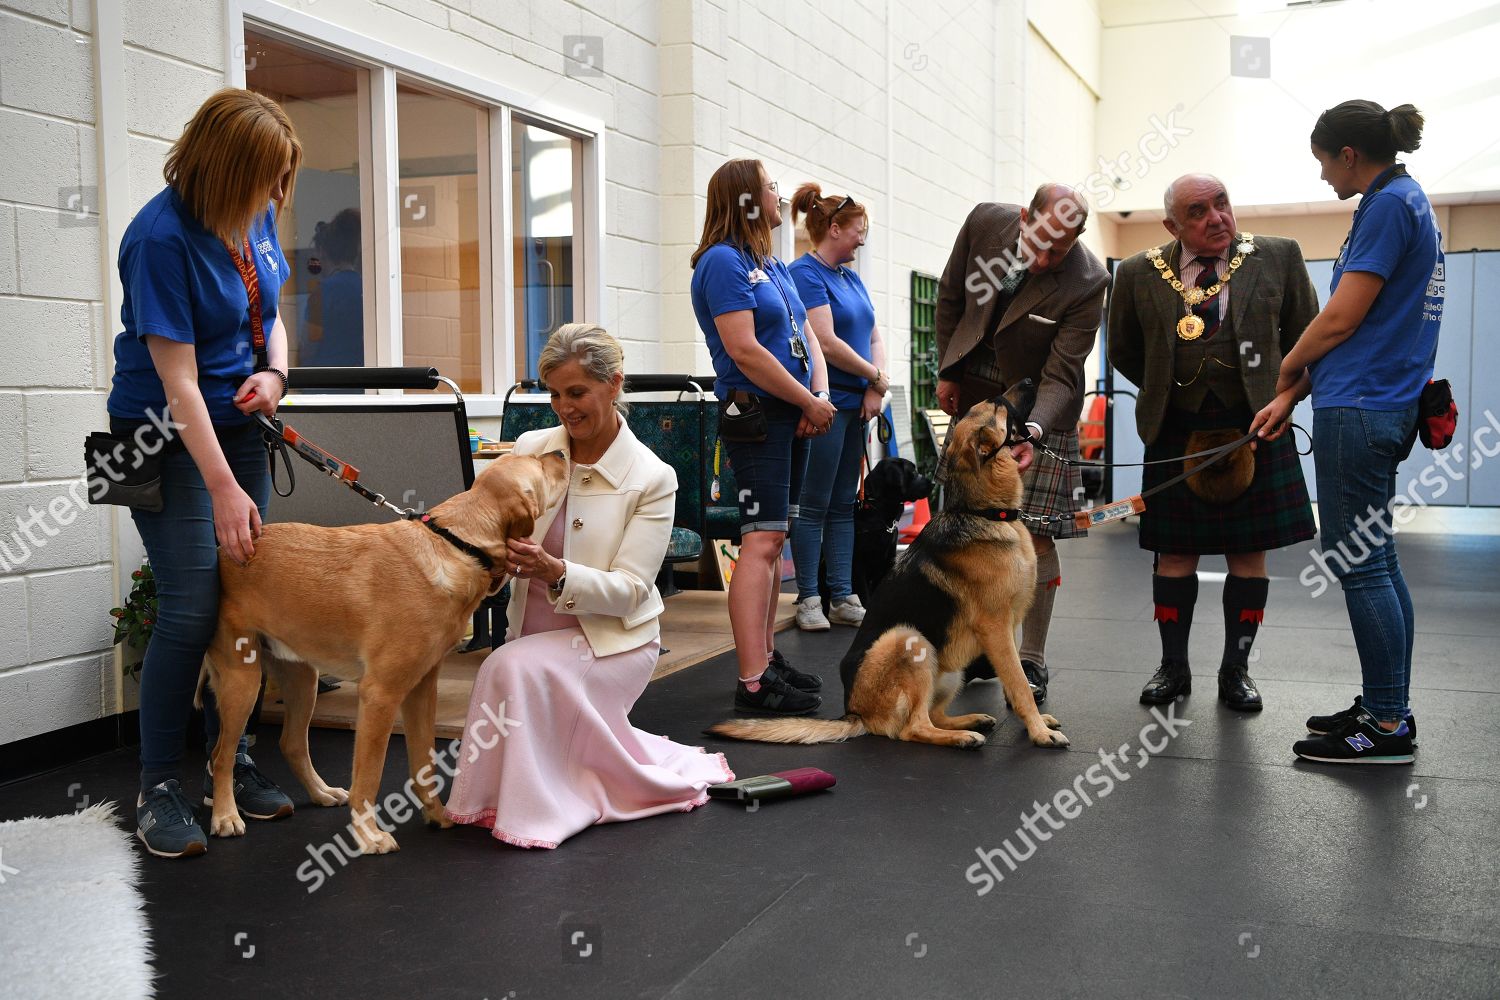 sophie-countess-of-wessex-and-prince-edward-visit-to-scotland-uk-shutterstock-editorial-10325445cv.jpg